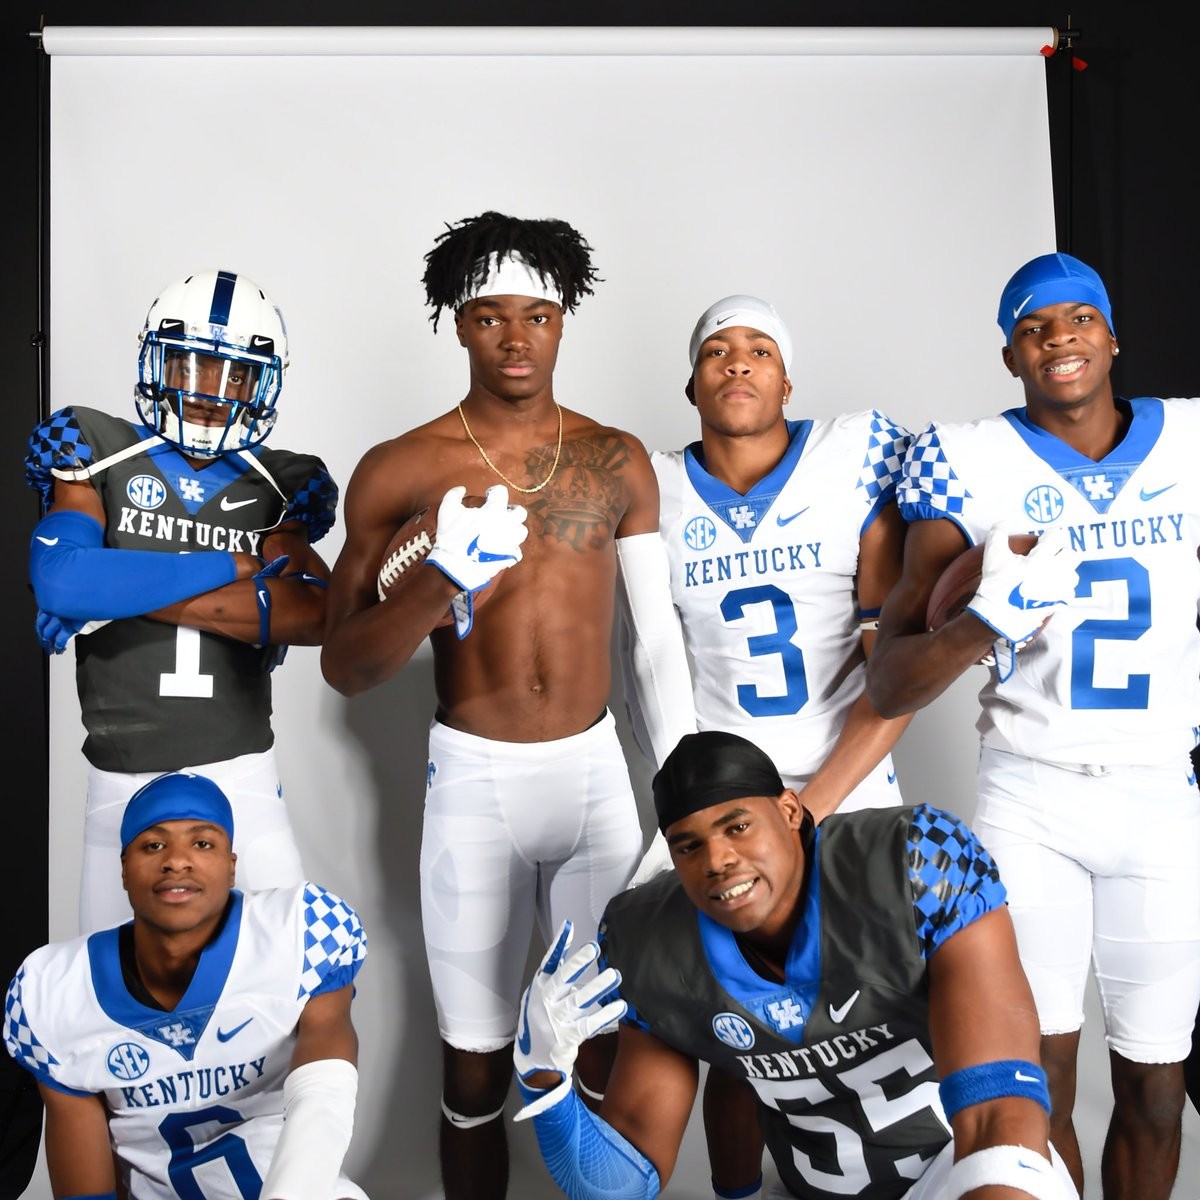 A Look at Kentucky’s 20 Signees in the 2018 Recruiting Class